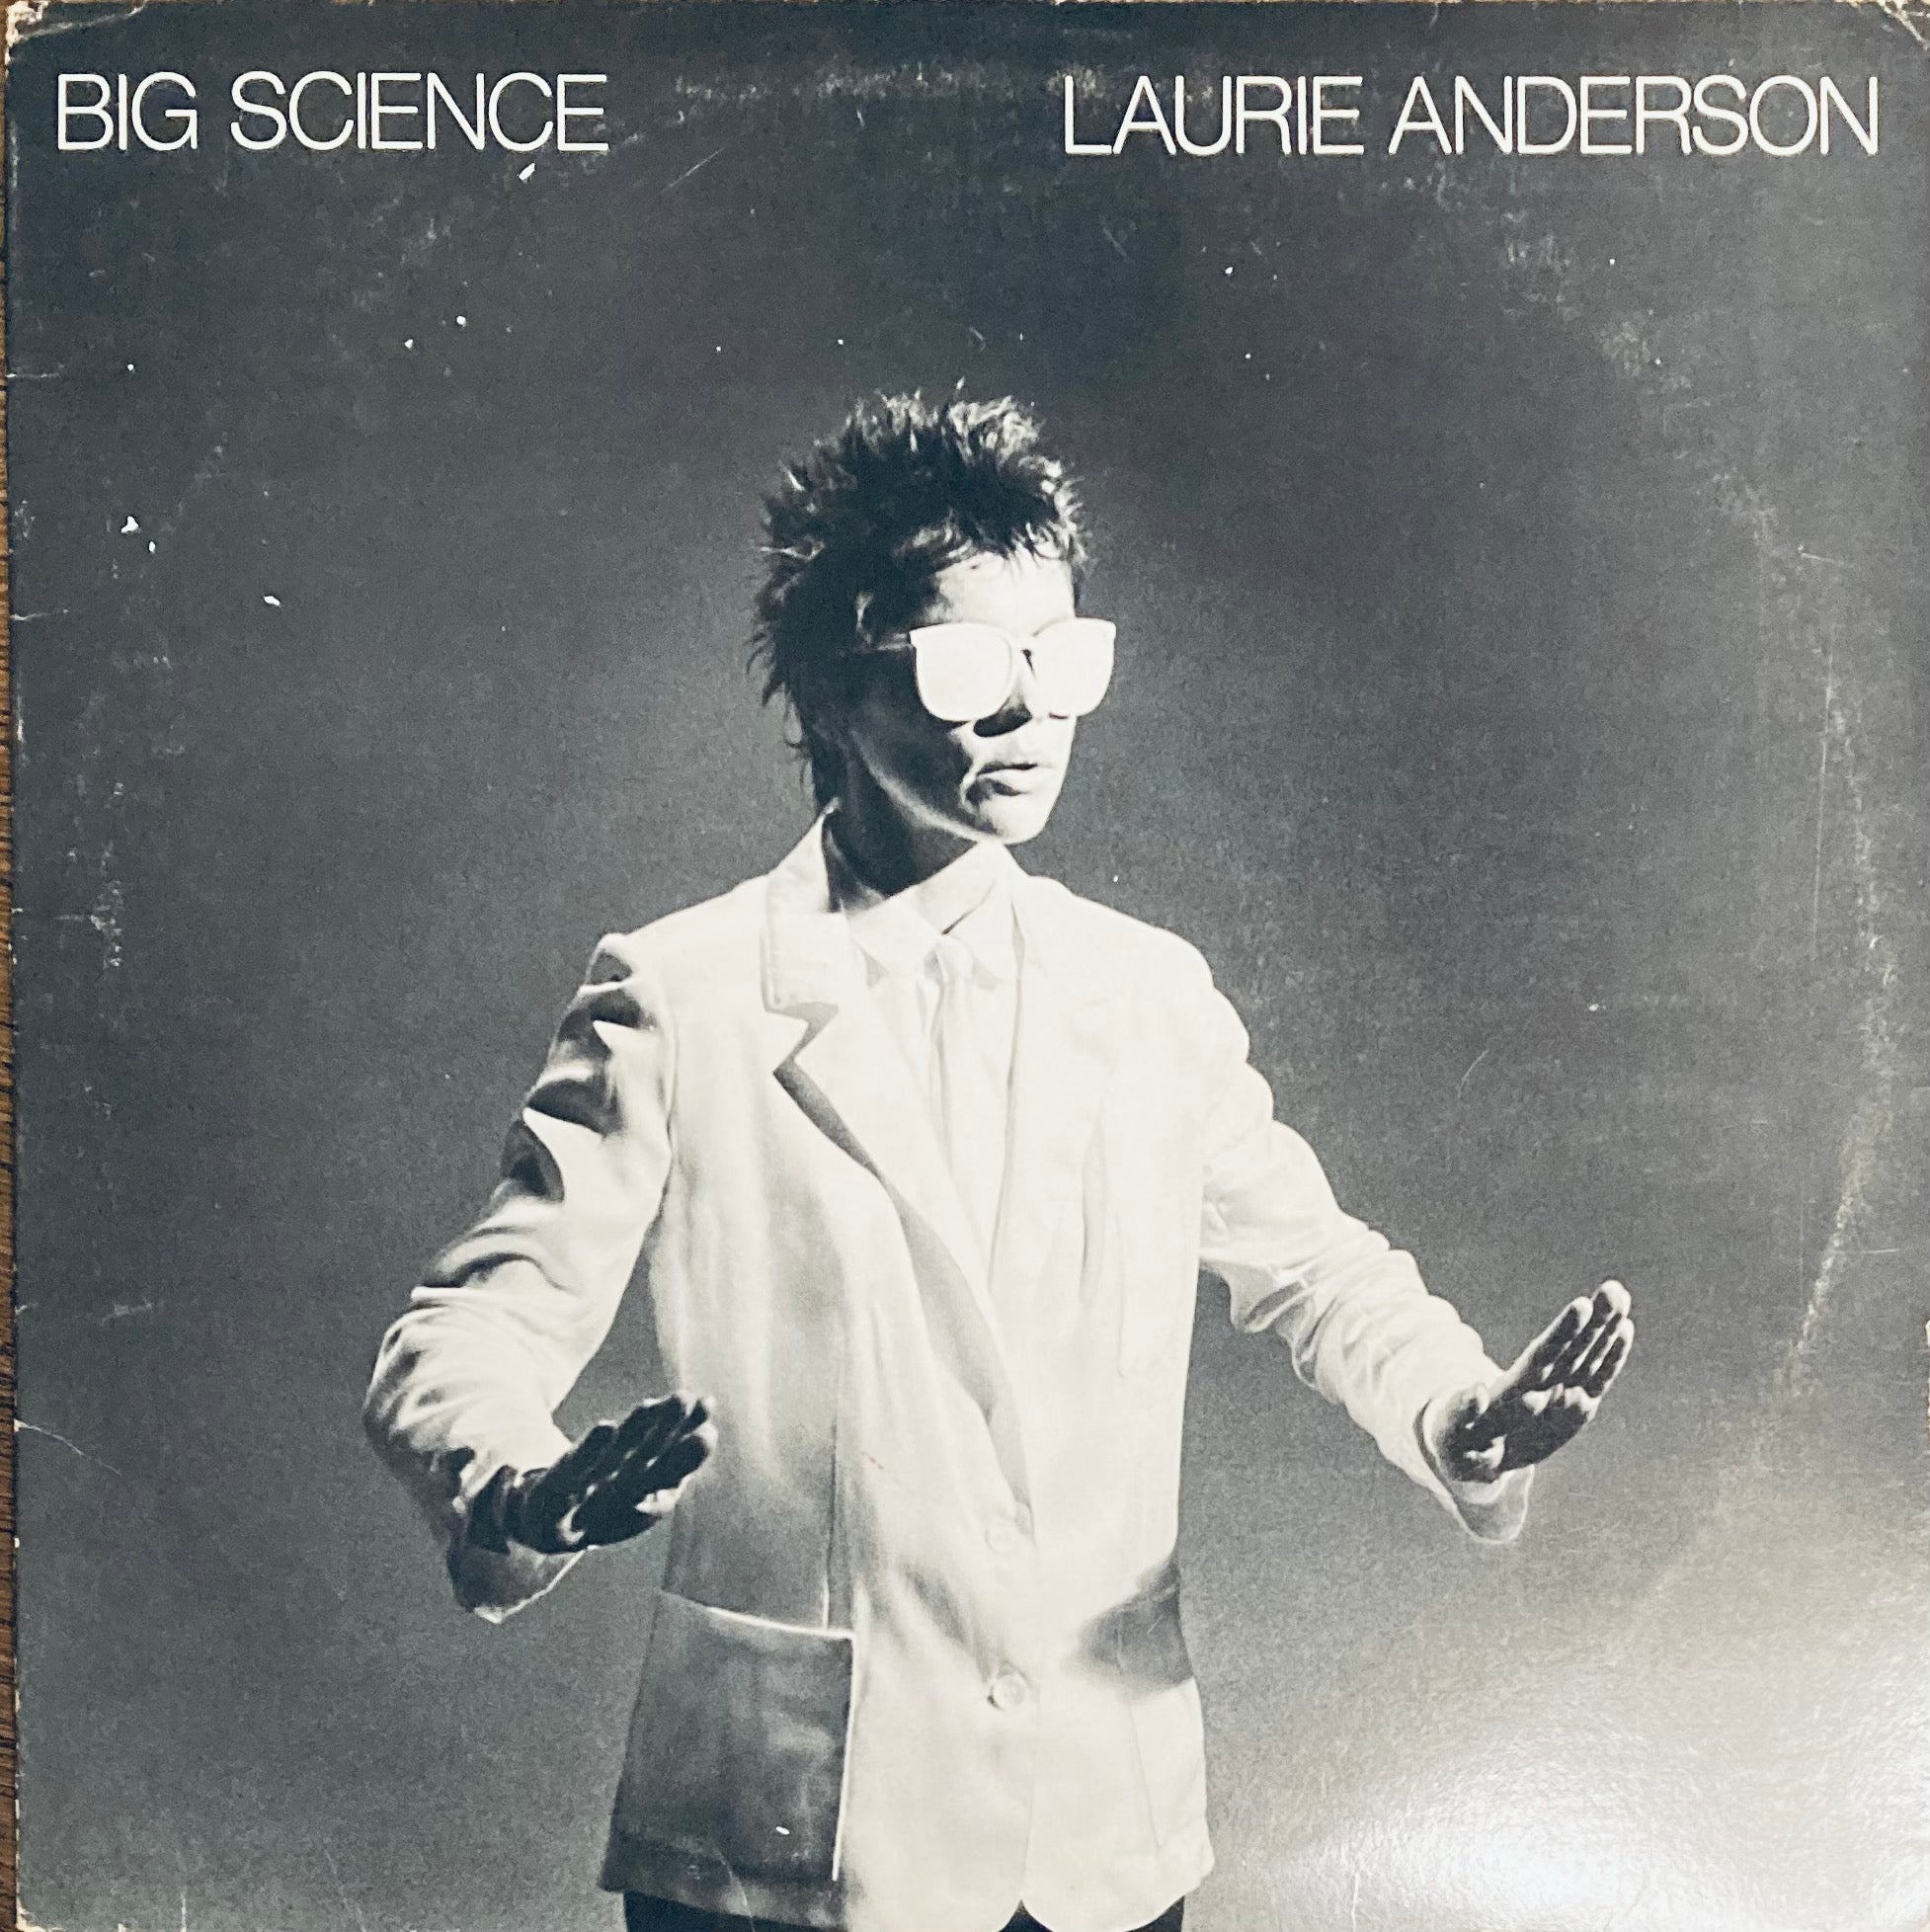 Laurie Anderson “Big Science” LP (1982)